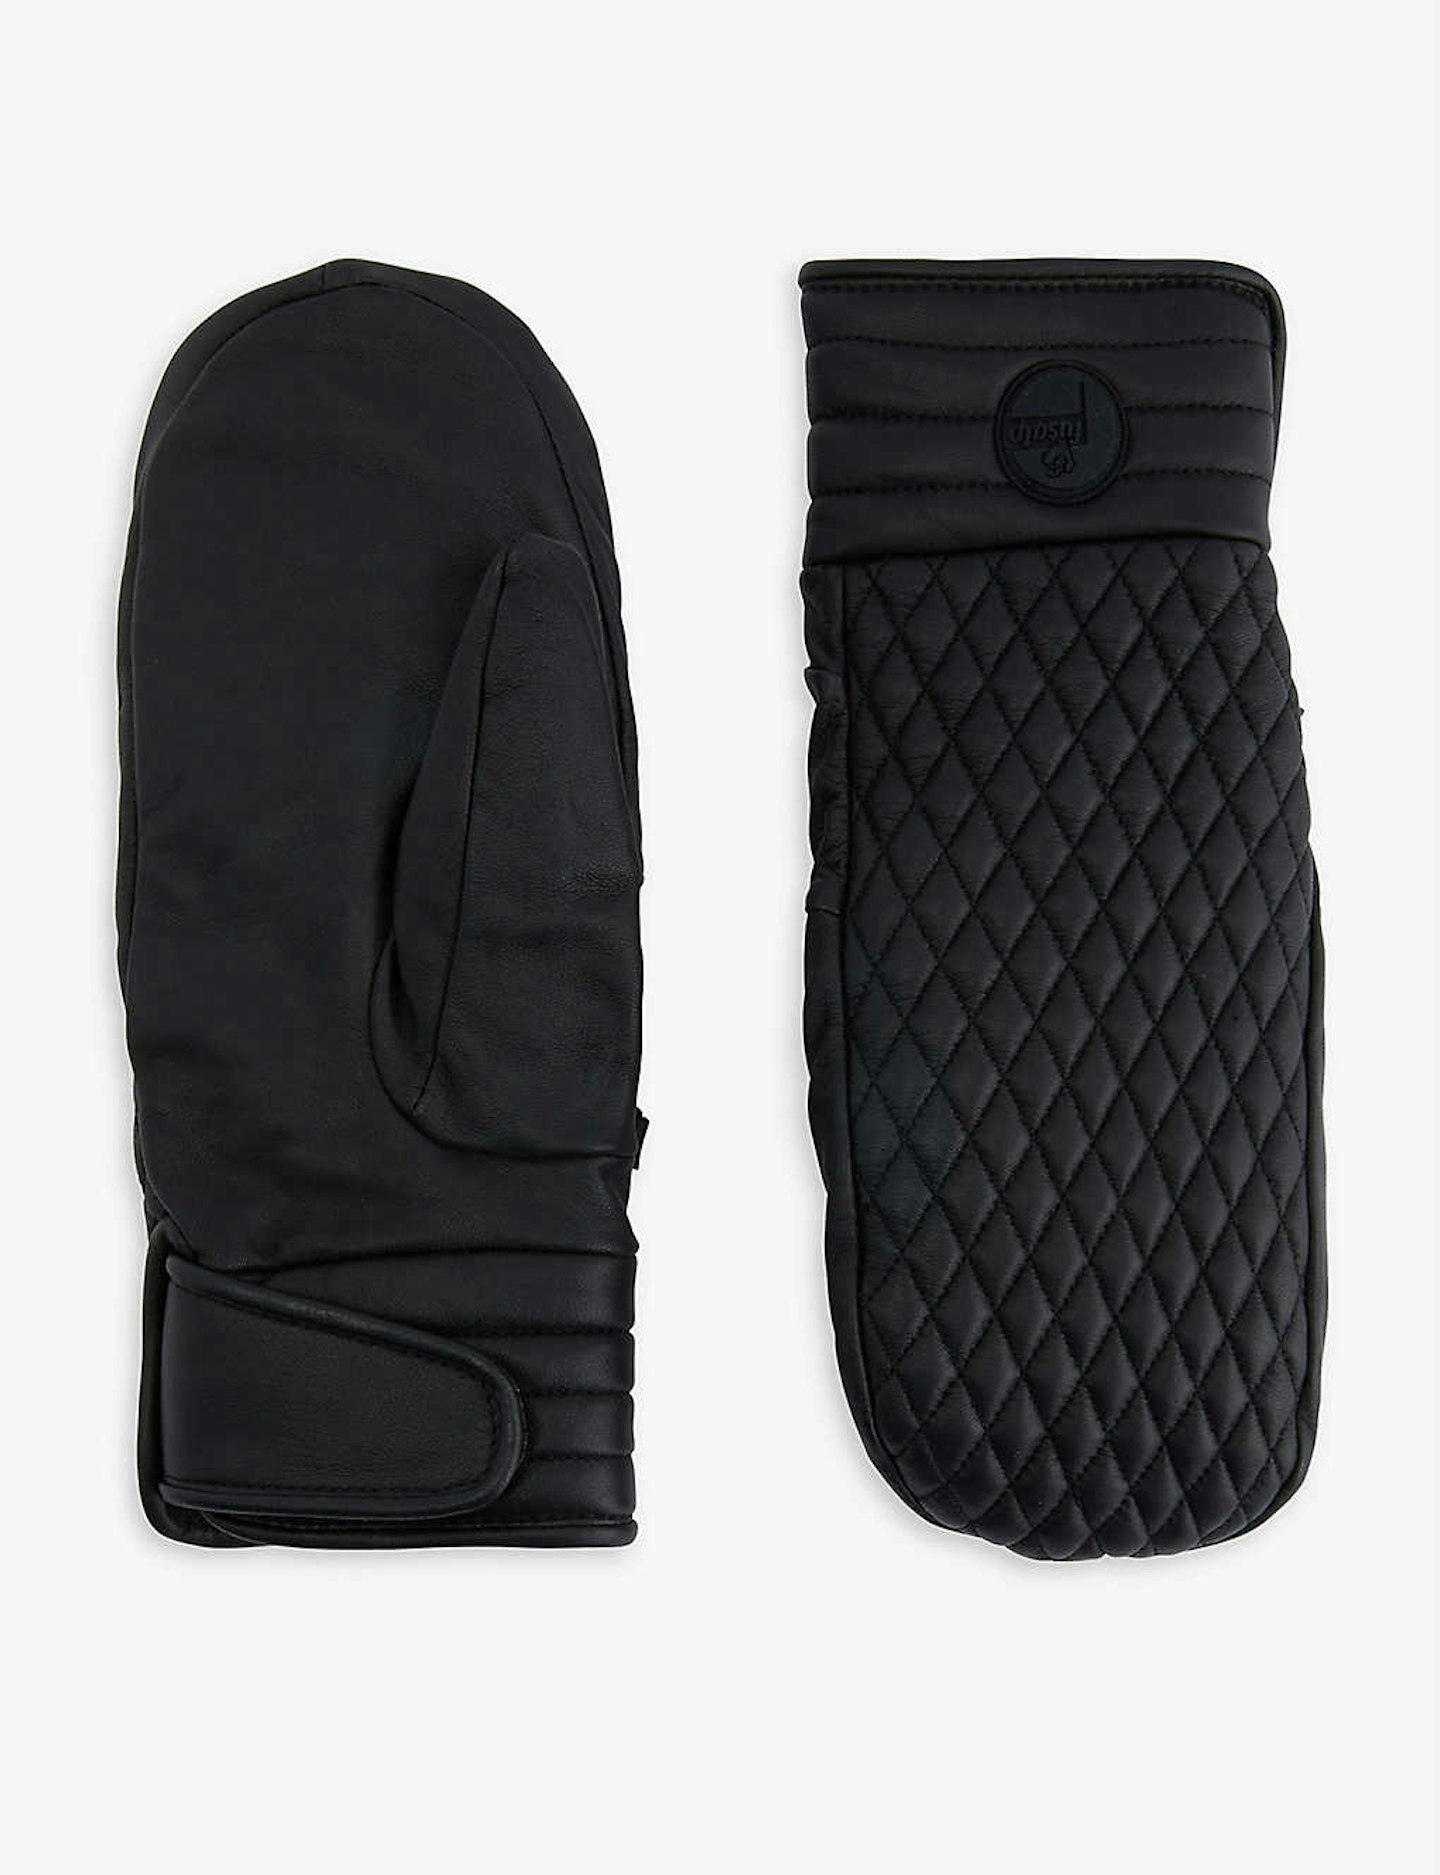 Fusalp, Athena quilted leather mittens, £170